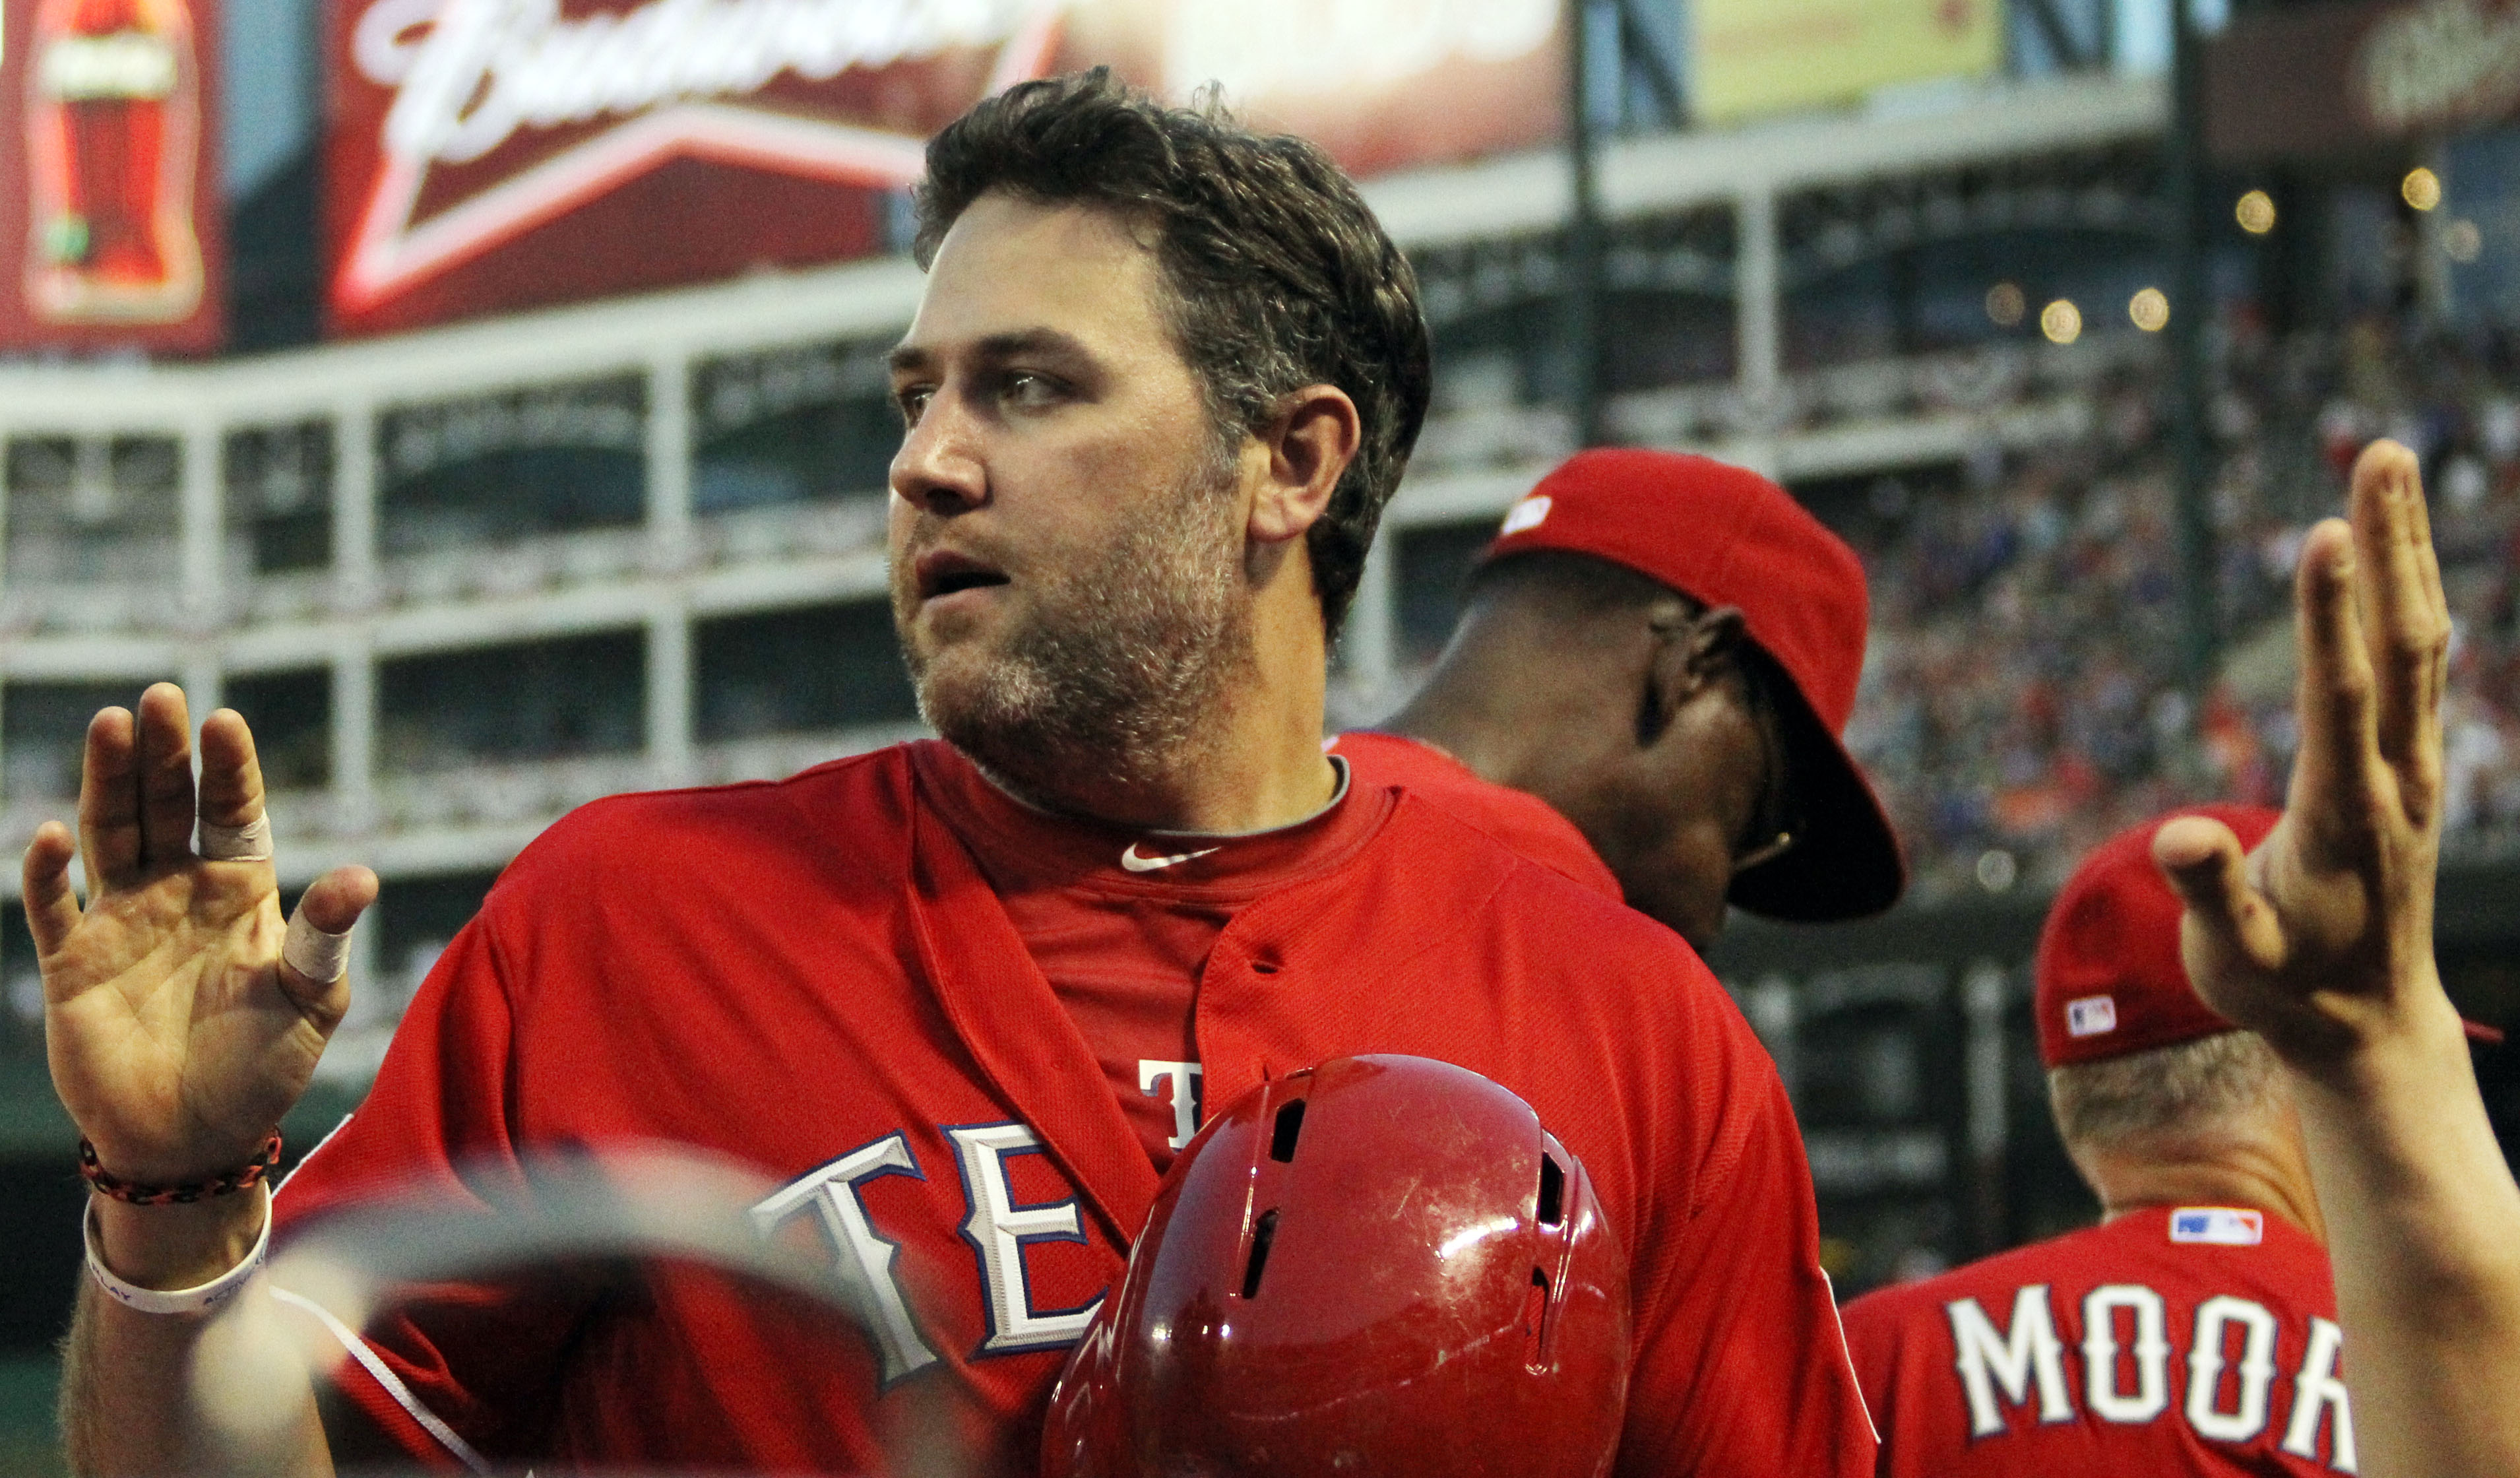 Houston Astros' Lance Berkman walks back to the dugout after